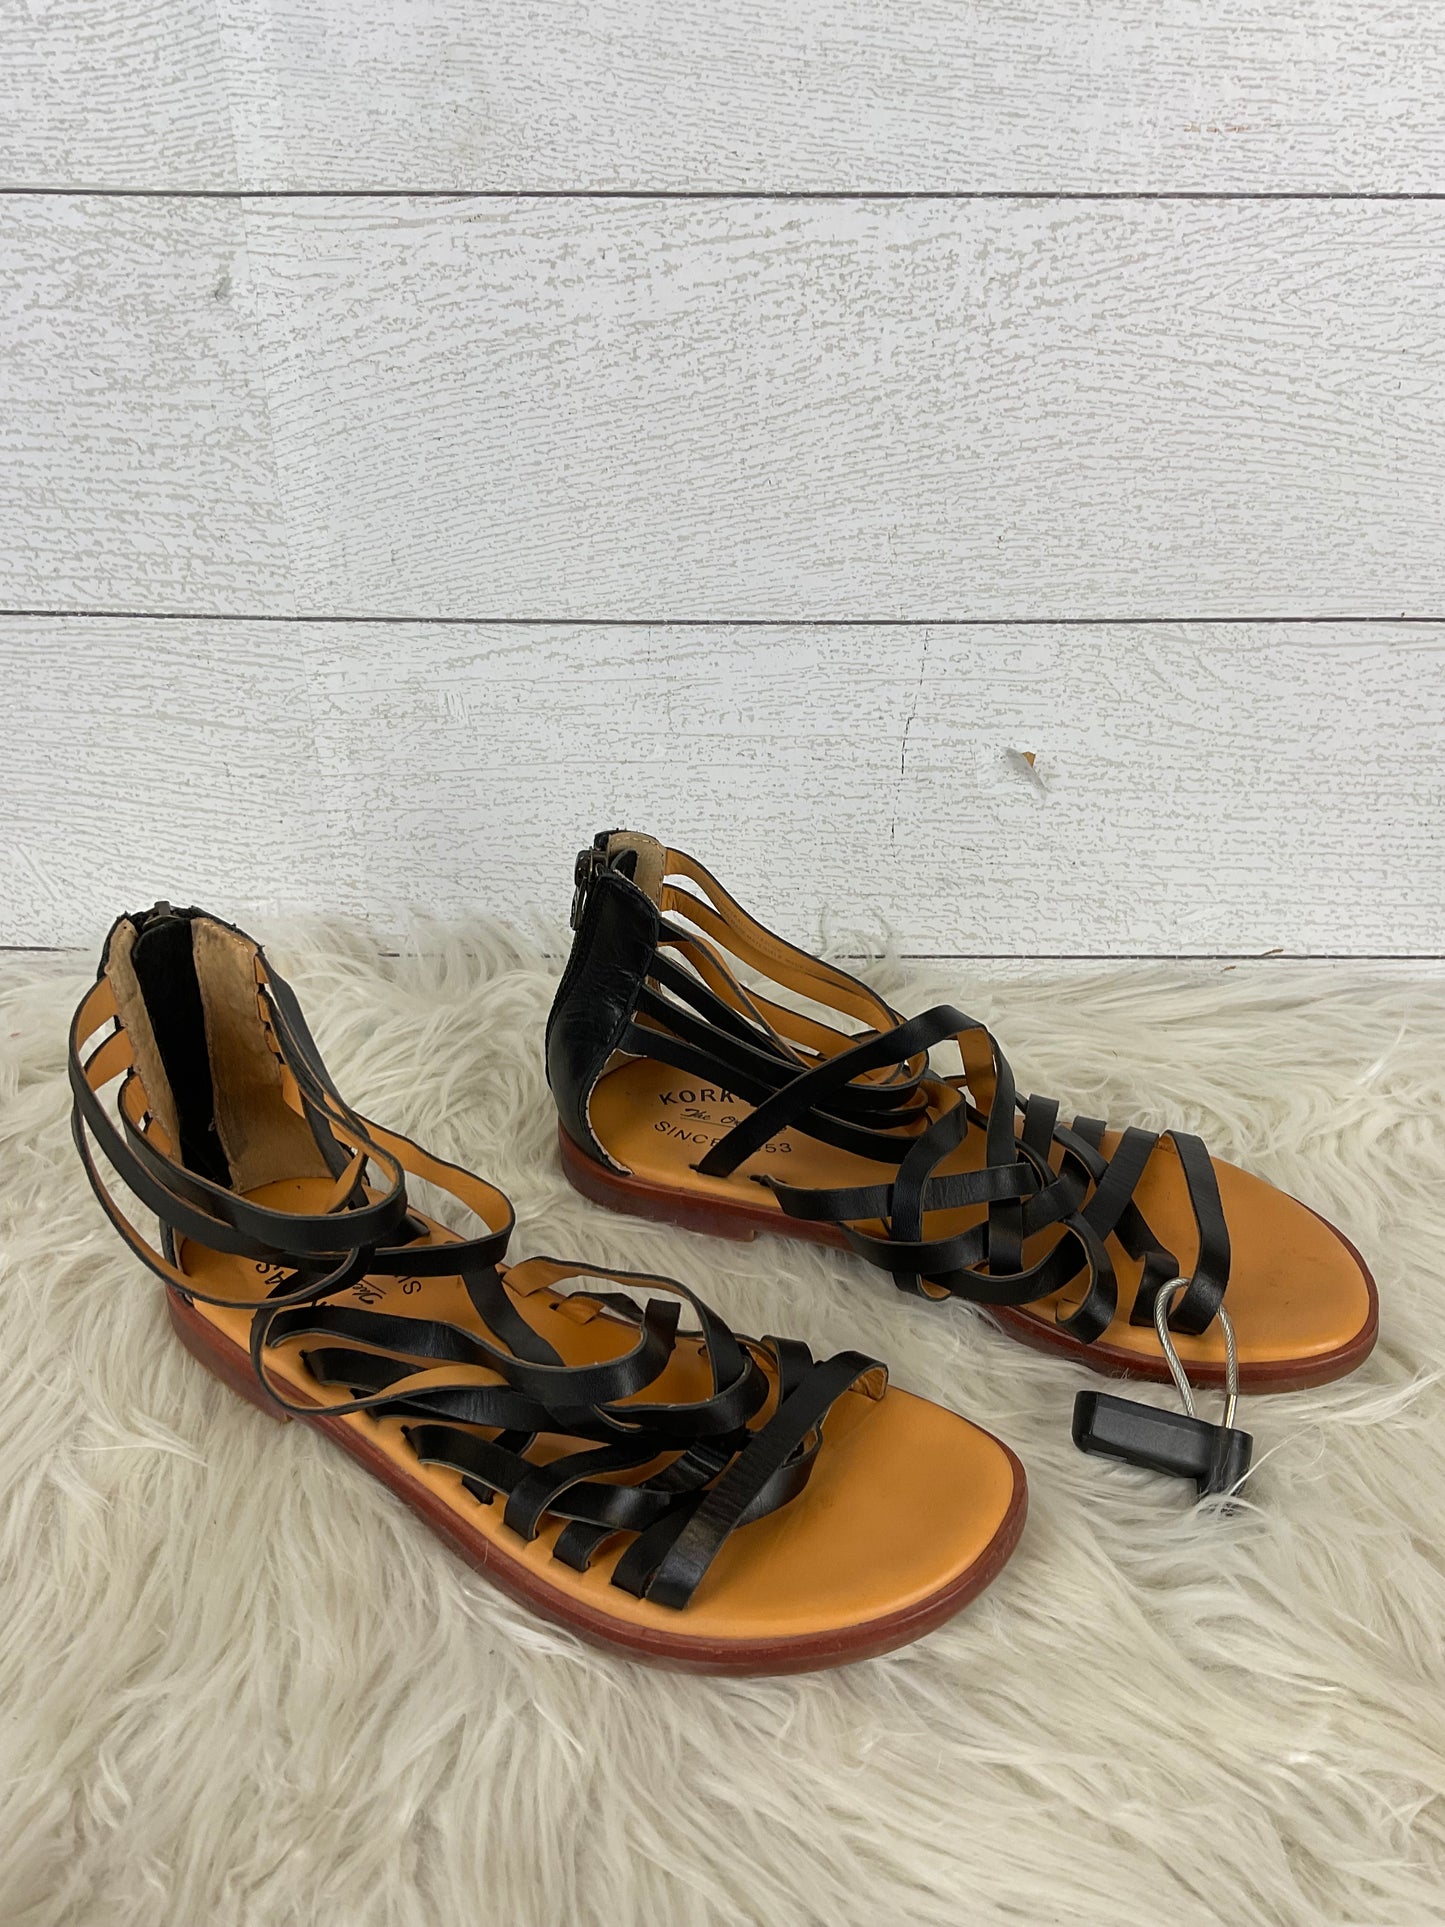 Sandals Flats By Kork Ease  Size: 8